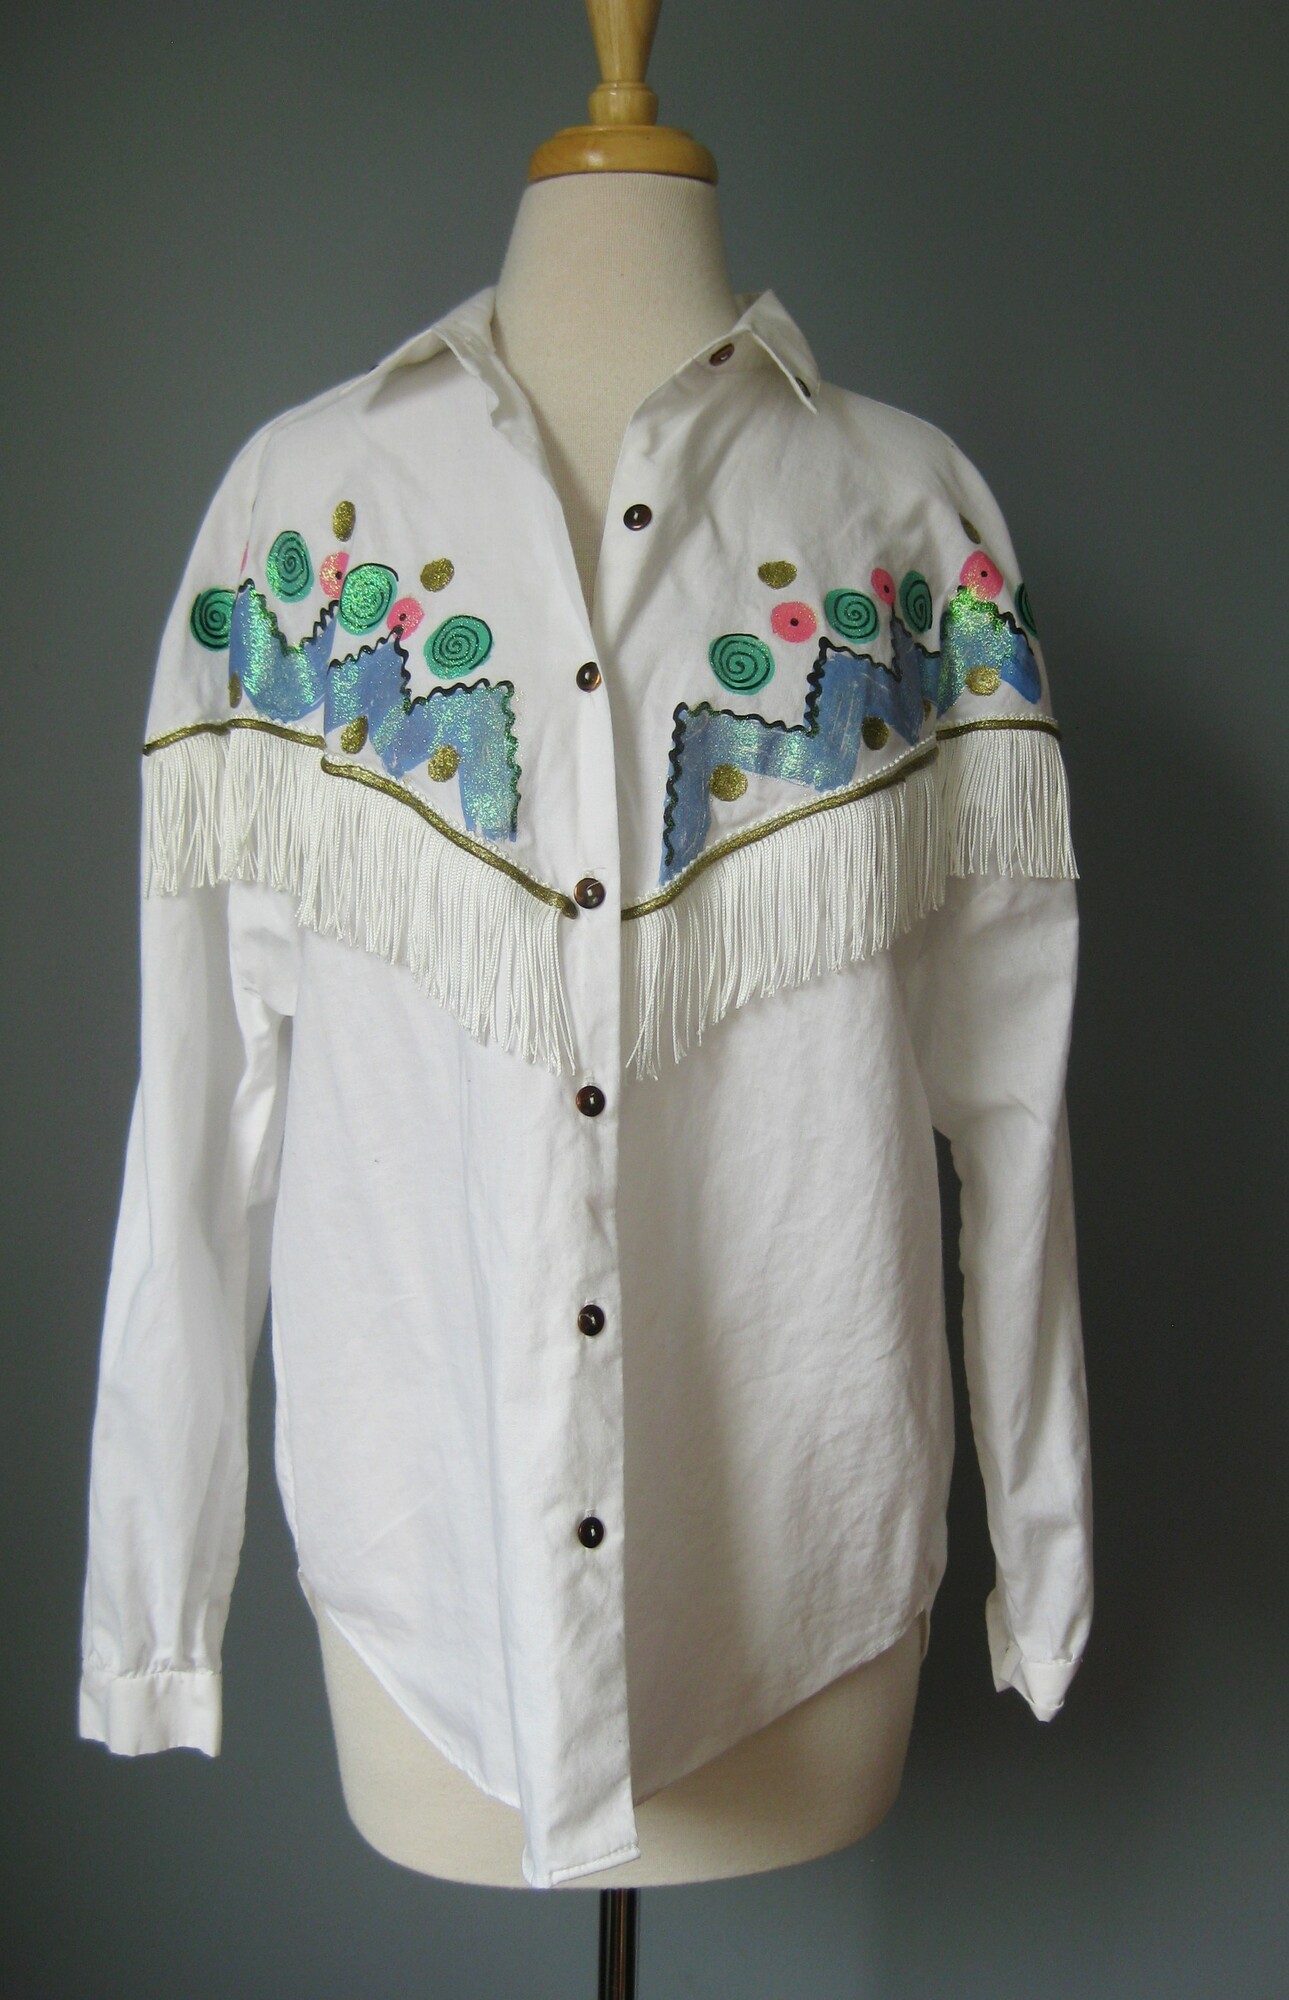 Vtg 80 Box Office, White, Size: XL
Fun, somewhat western style white blouse by Box Office, made in the 1990s.
It's got white fringe across the chest and a glittery blue and pink design painted on the front, a couple of jewels too.
The back is plain.
assembled in Mexico
100% cotton

excellent condition
Marked size 16/18
flat measurements:
shoulder to shoulder: 24
armpit to armpit: 23.5
underarm sleeve seam: 16.5
length: 26.25

thanks for looking!
#42873